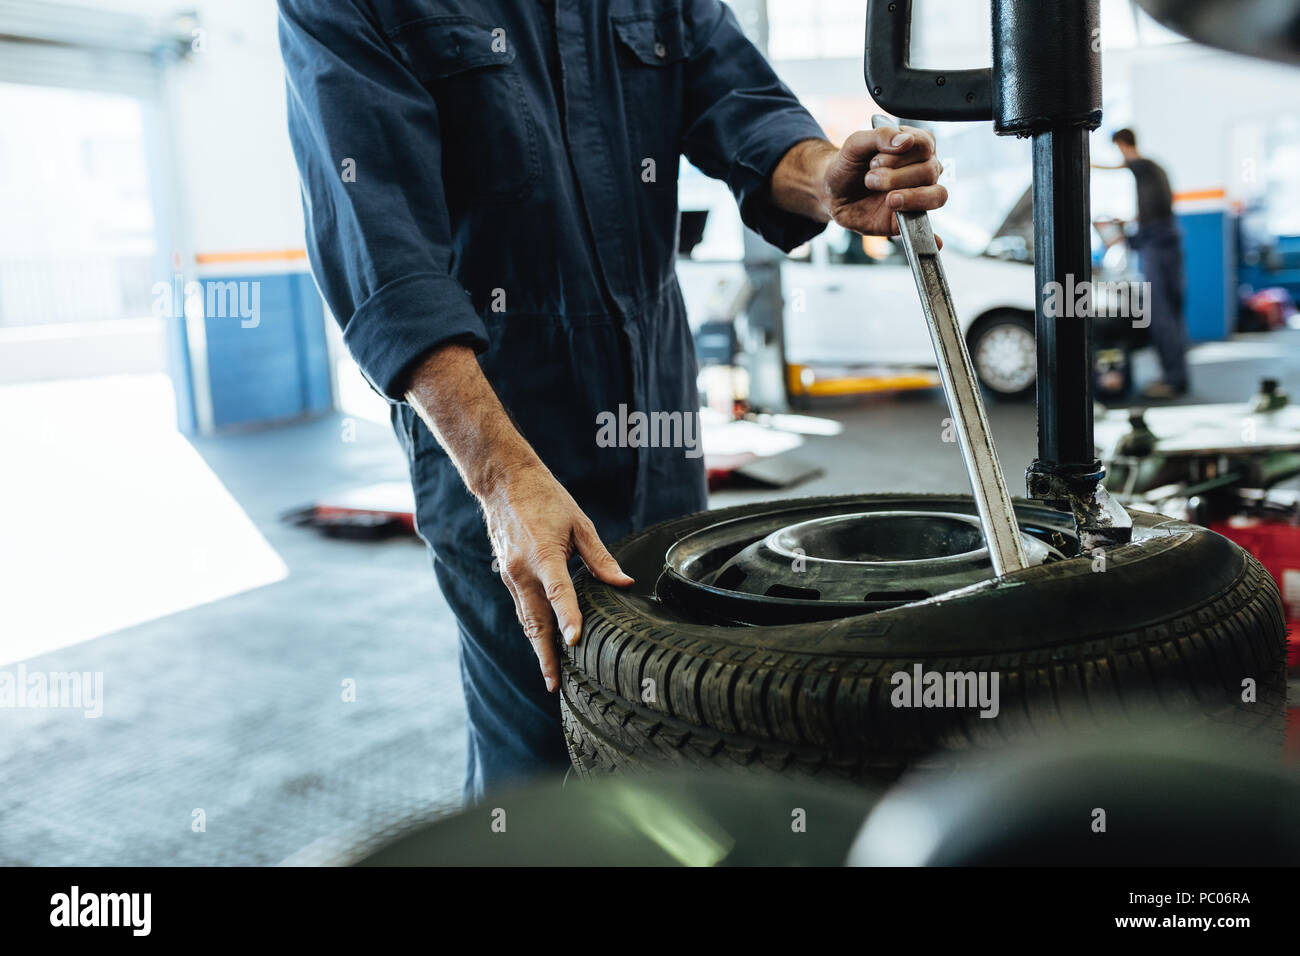 Mechanic changing car tire on a tire changing machine in workshop. Cropped shot of mechanic hands removing tire from disc on machine. Stock Photo